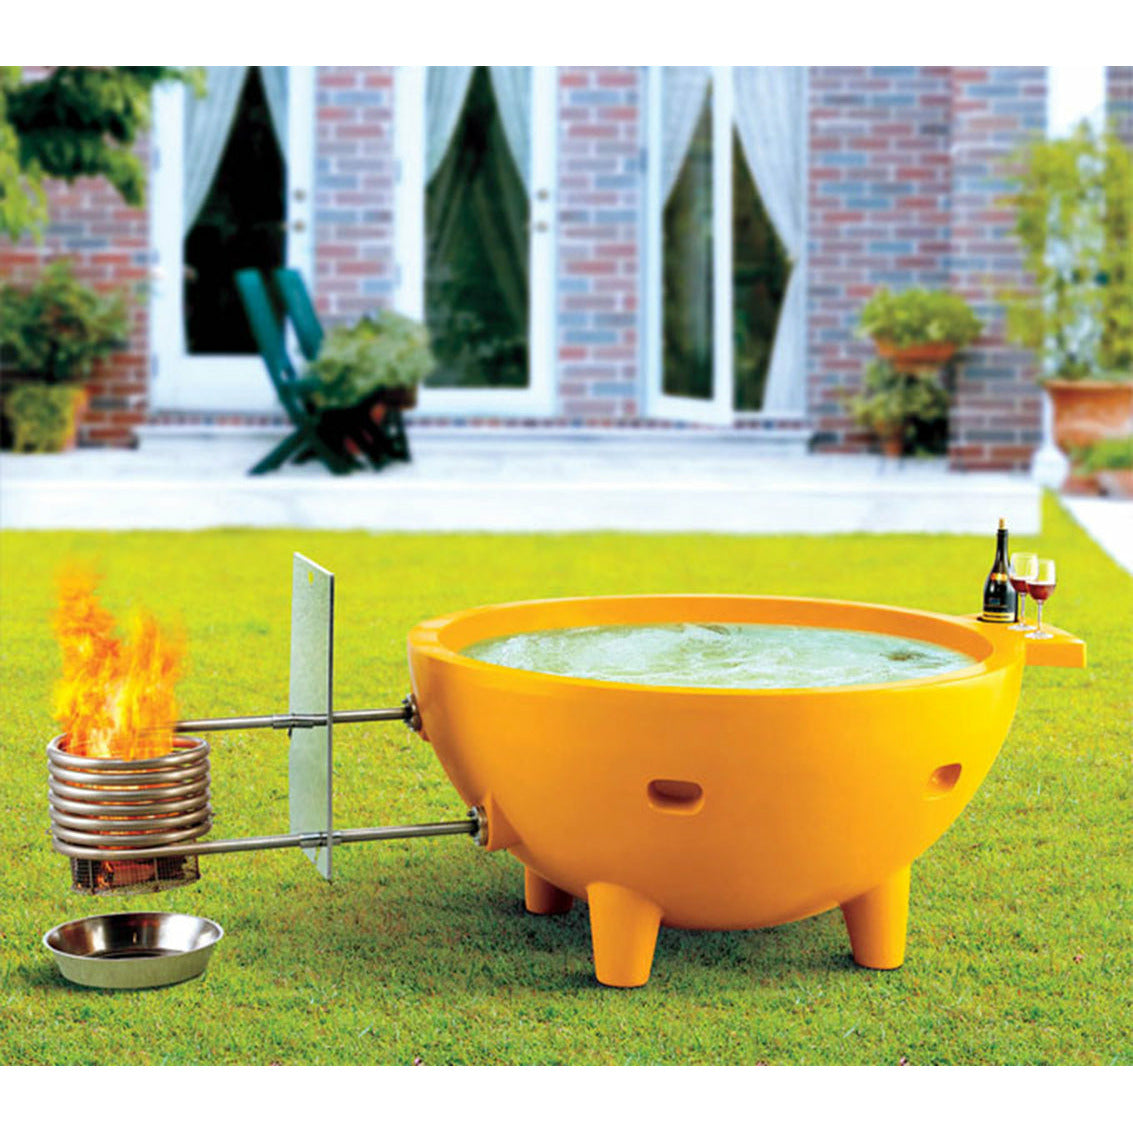 Orange, Red wine, Olive green, Dark blue  ALFI FireHotTub The Round Fire Burning Portable Outdoor Hot Bath Tub made of acrylic and reinforced with a fiberglass core, Flat feet and ledge in a white background